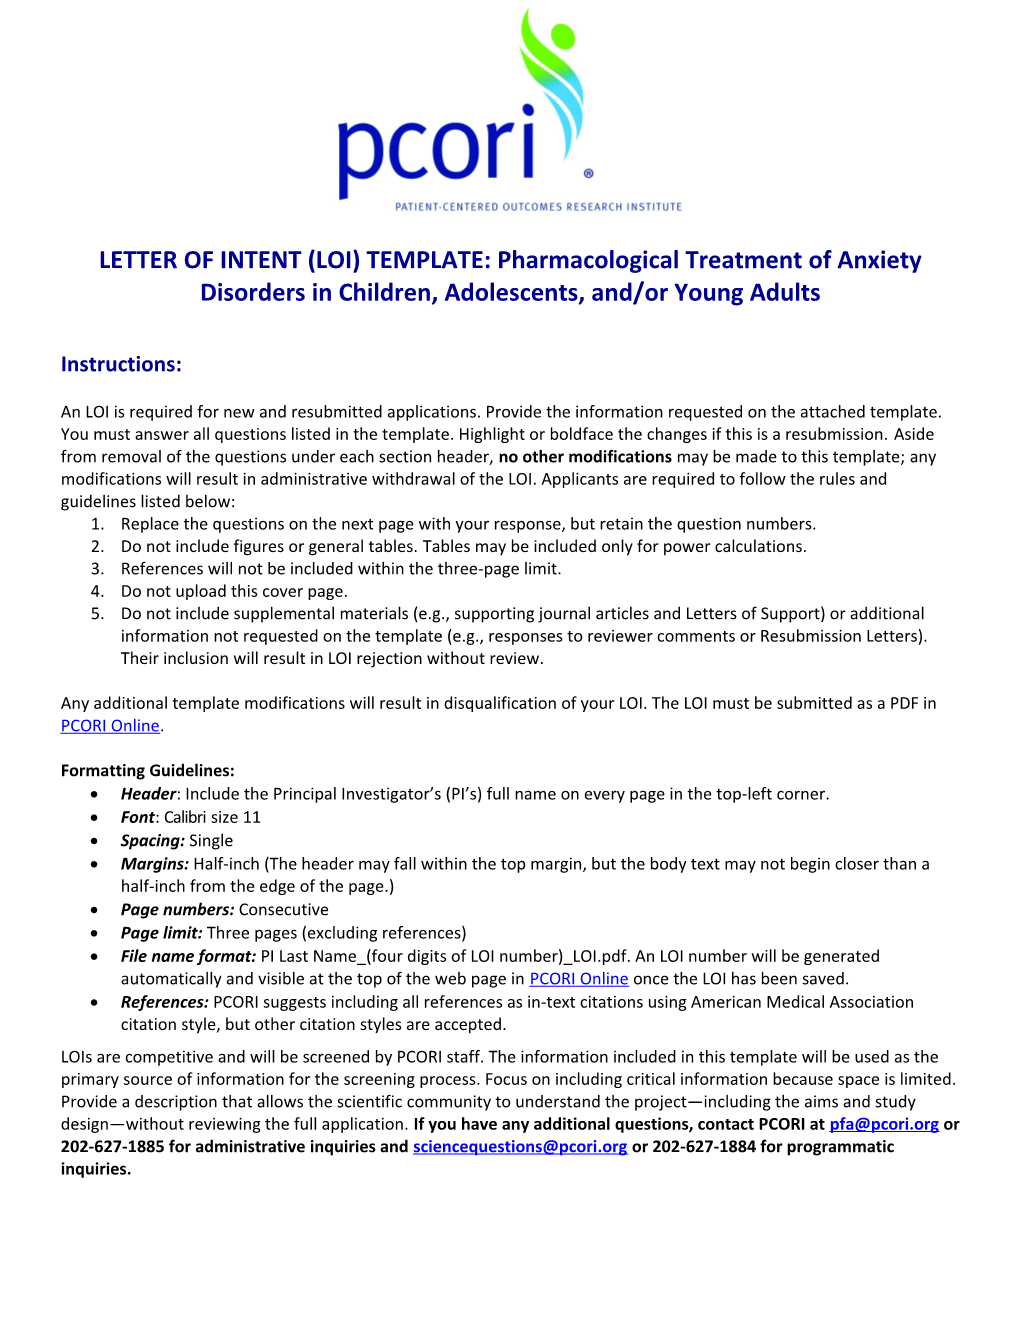 LETTER of INTENT (LOI) TEMPLATE: Pharmacological Treatment of Anxiety Disorders in Children